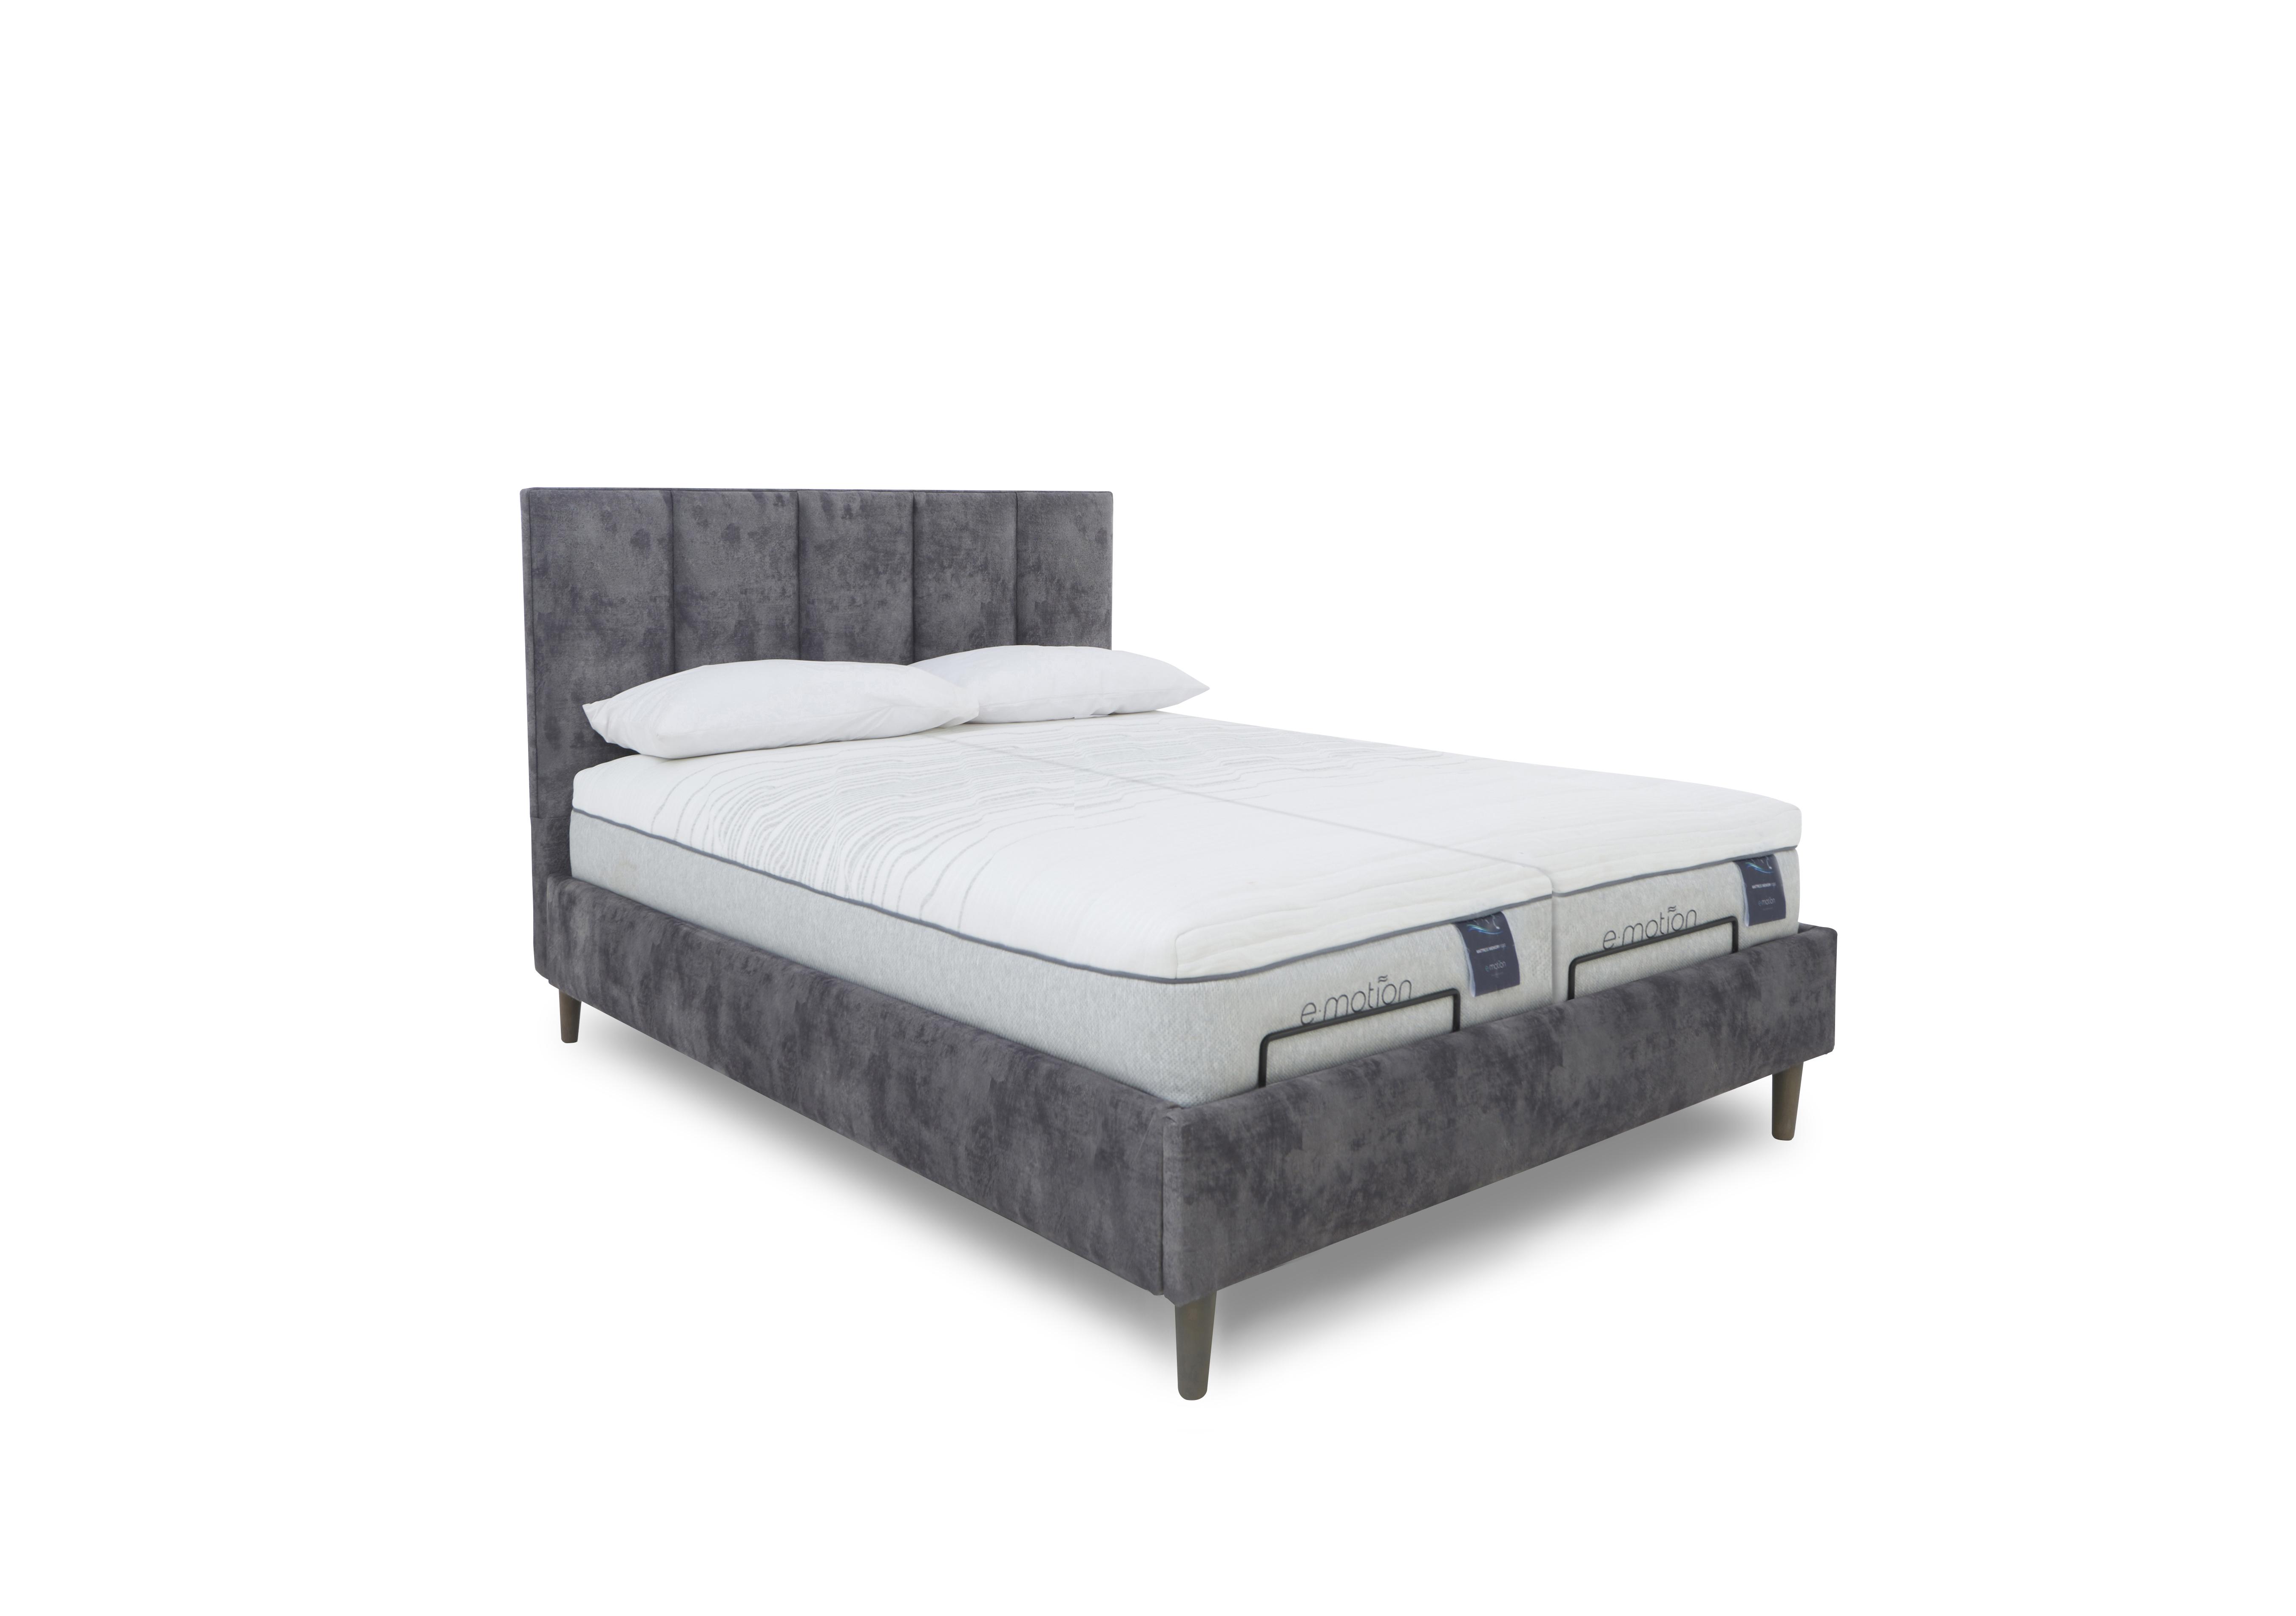 E-Motion Aiko Dual Adjustable Bed Frame with Massage Function in Daytona  Grey on Furniture Village